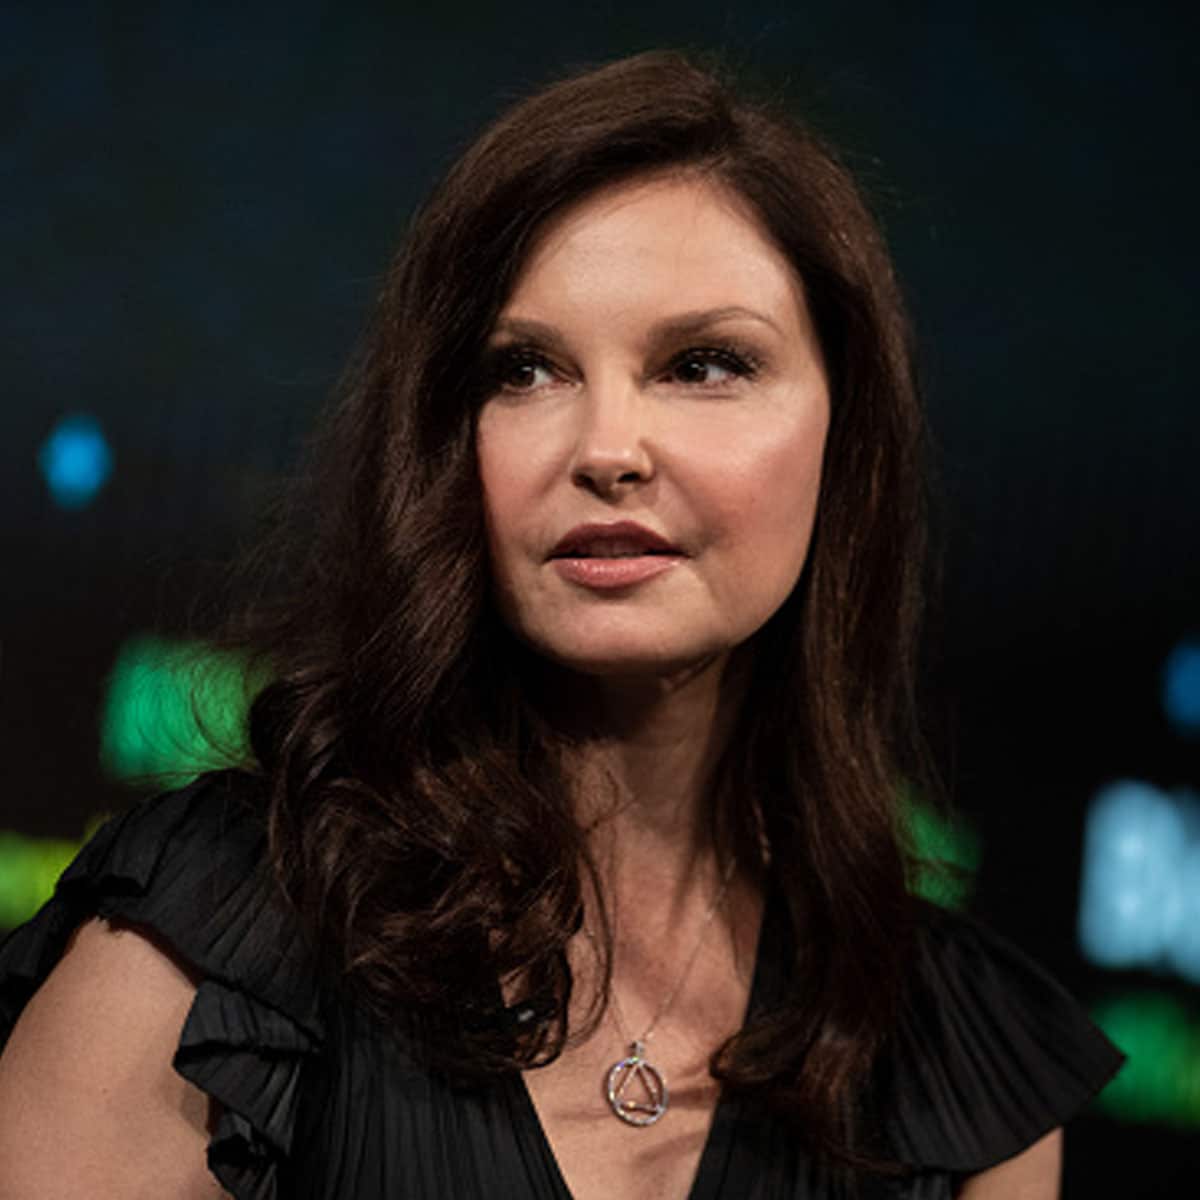 Ashley Judd speaks during the Bloomberg Business of Equality conference in New York